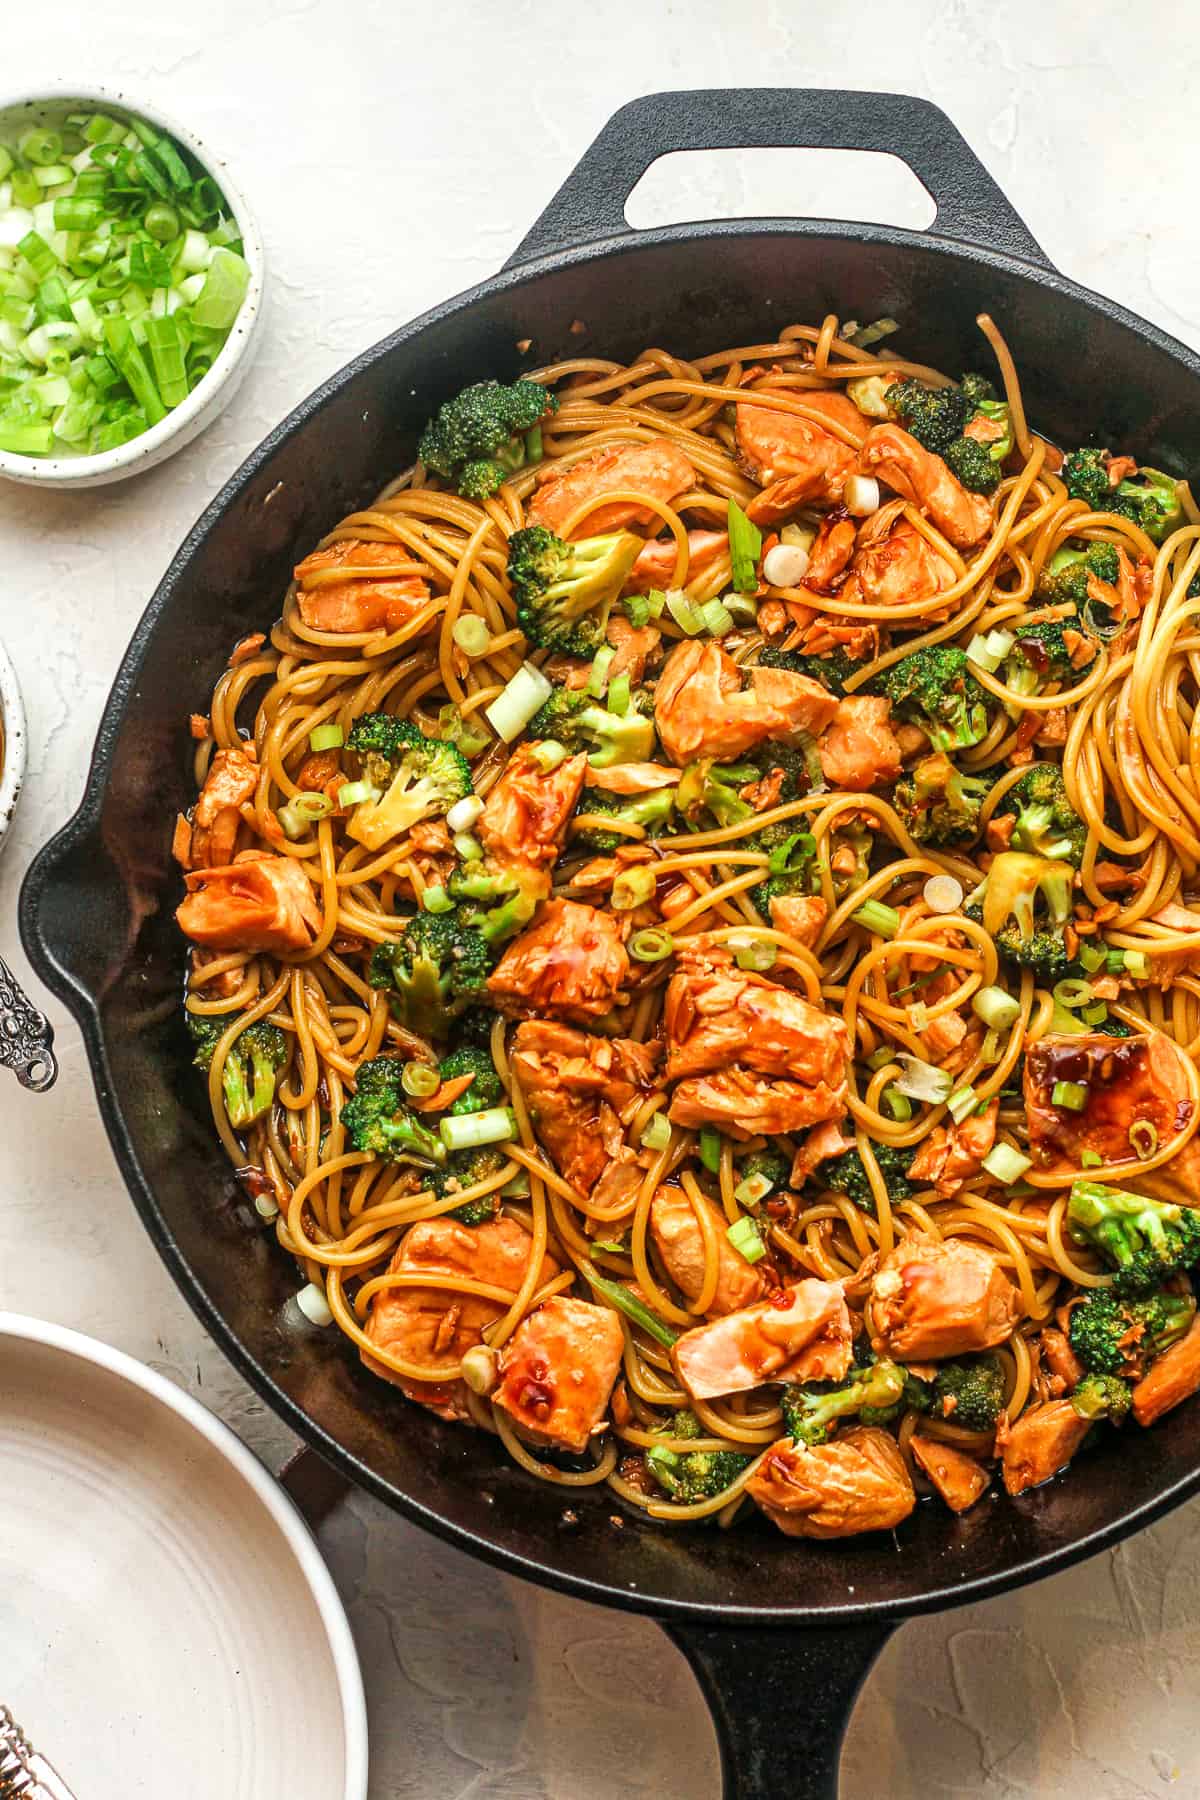 A skillet of the teriyaki salmon with noodles and broccoli.